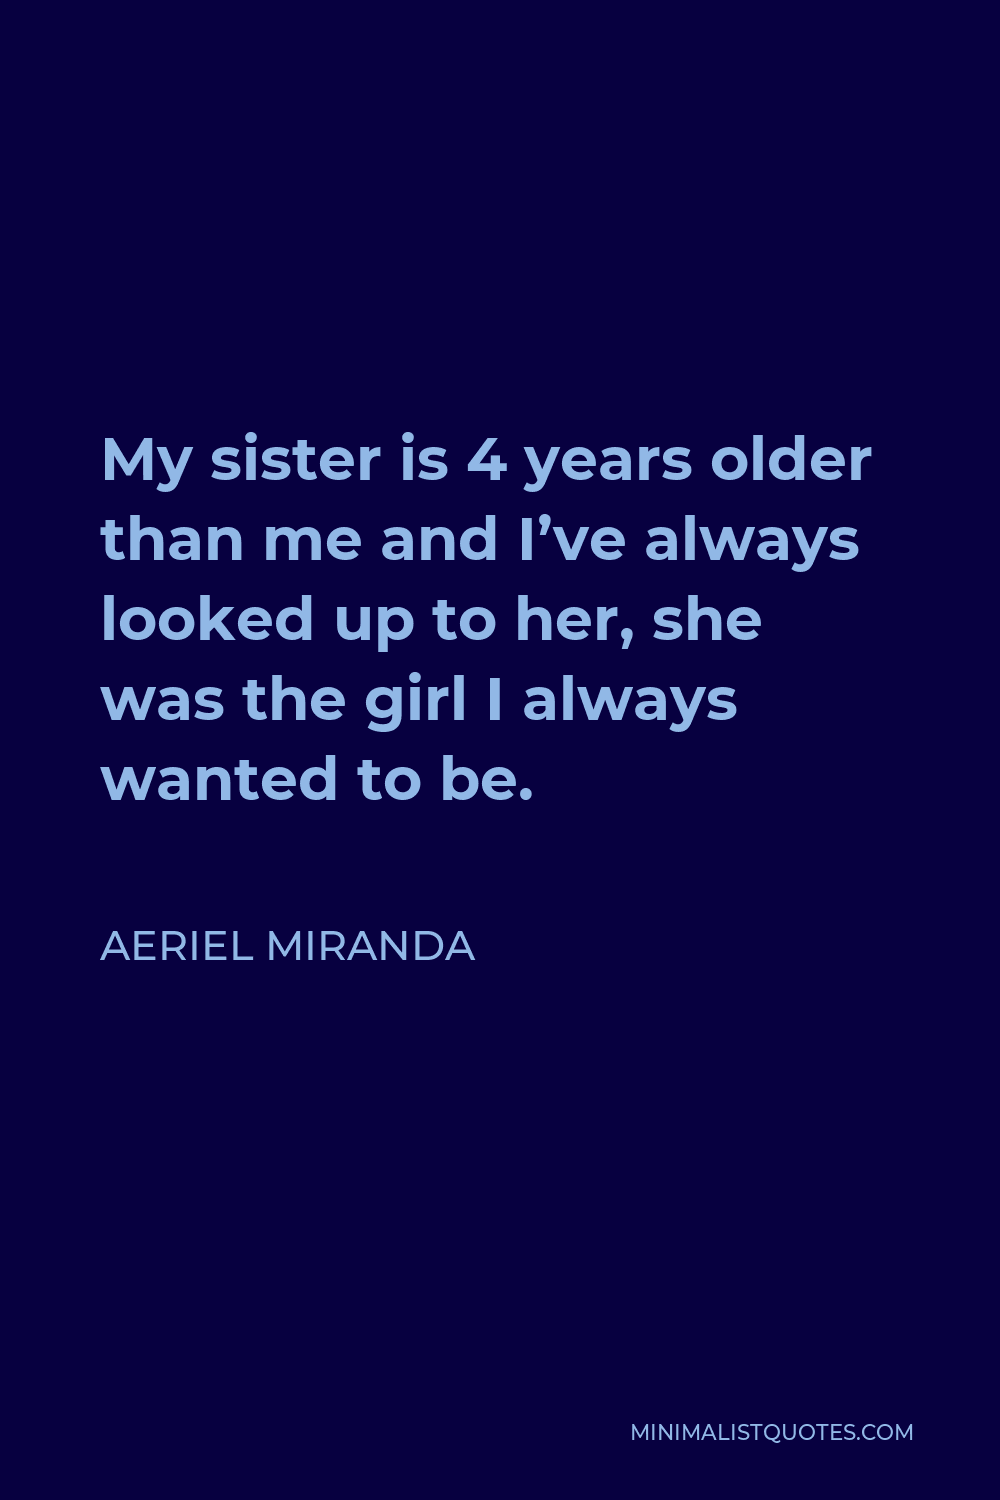 Aeriel Miranda Quote My Sister Is 4 Years Older Than Me And I Ve Always Looked Up To Her She